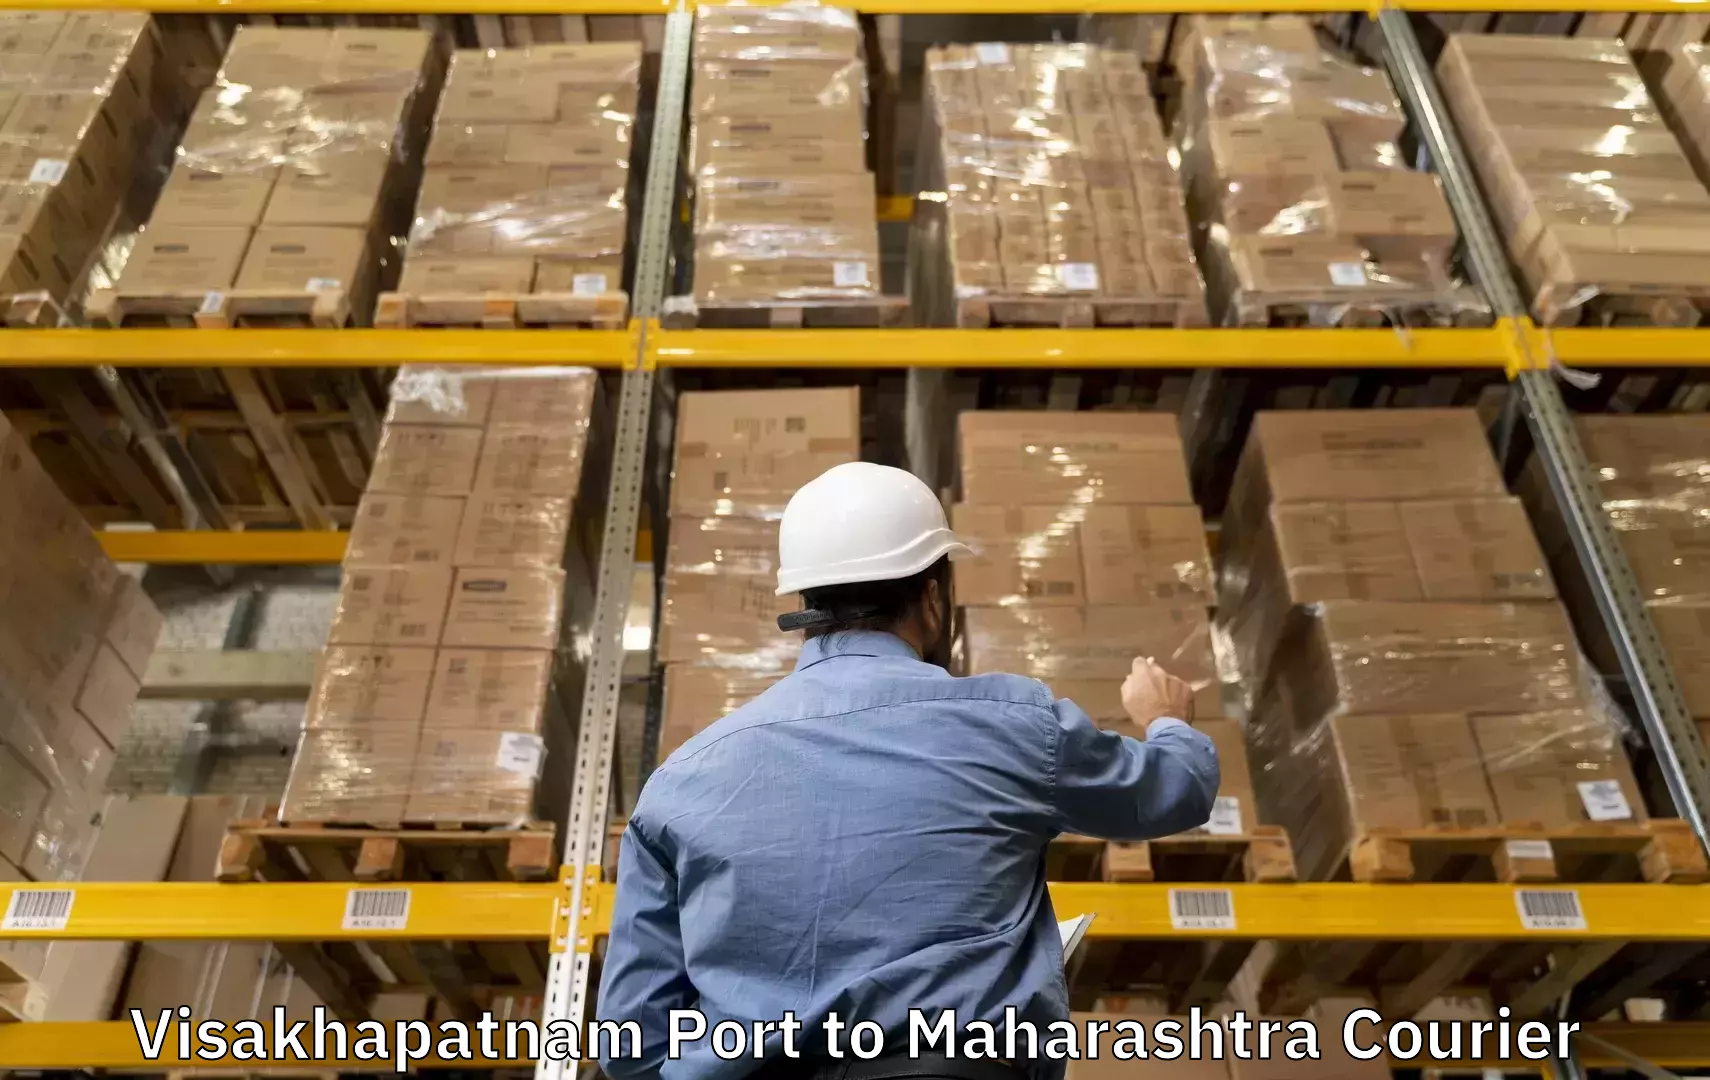 Baggage relocation service Visakhapatnam Port to Akole